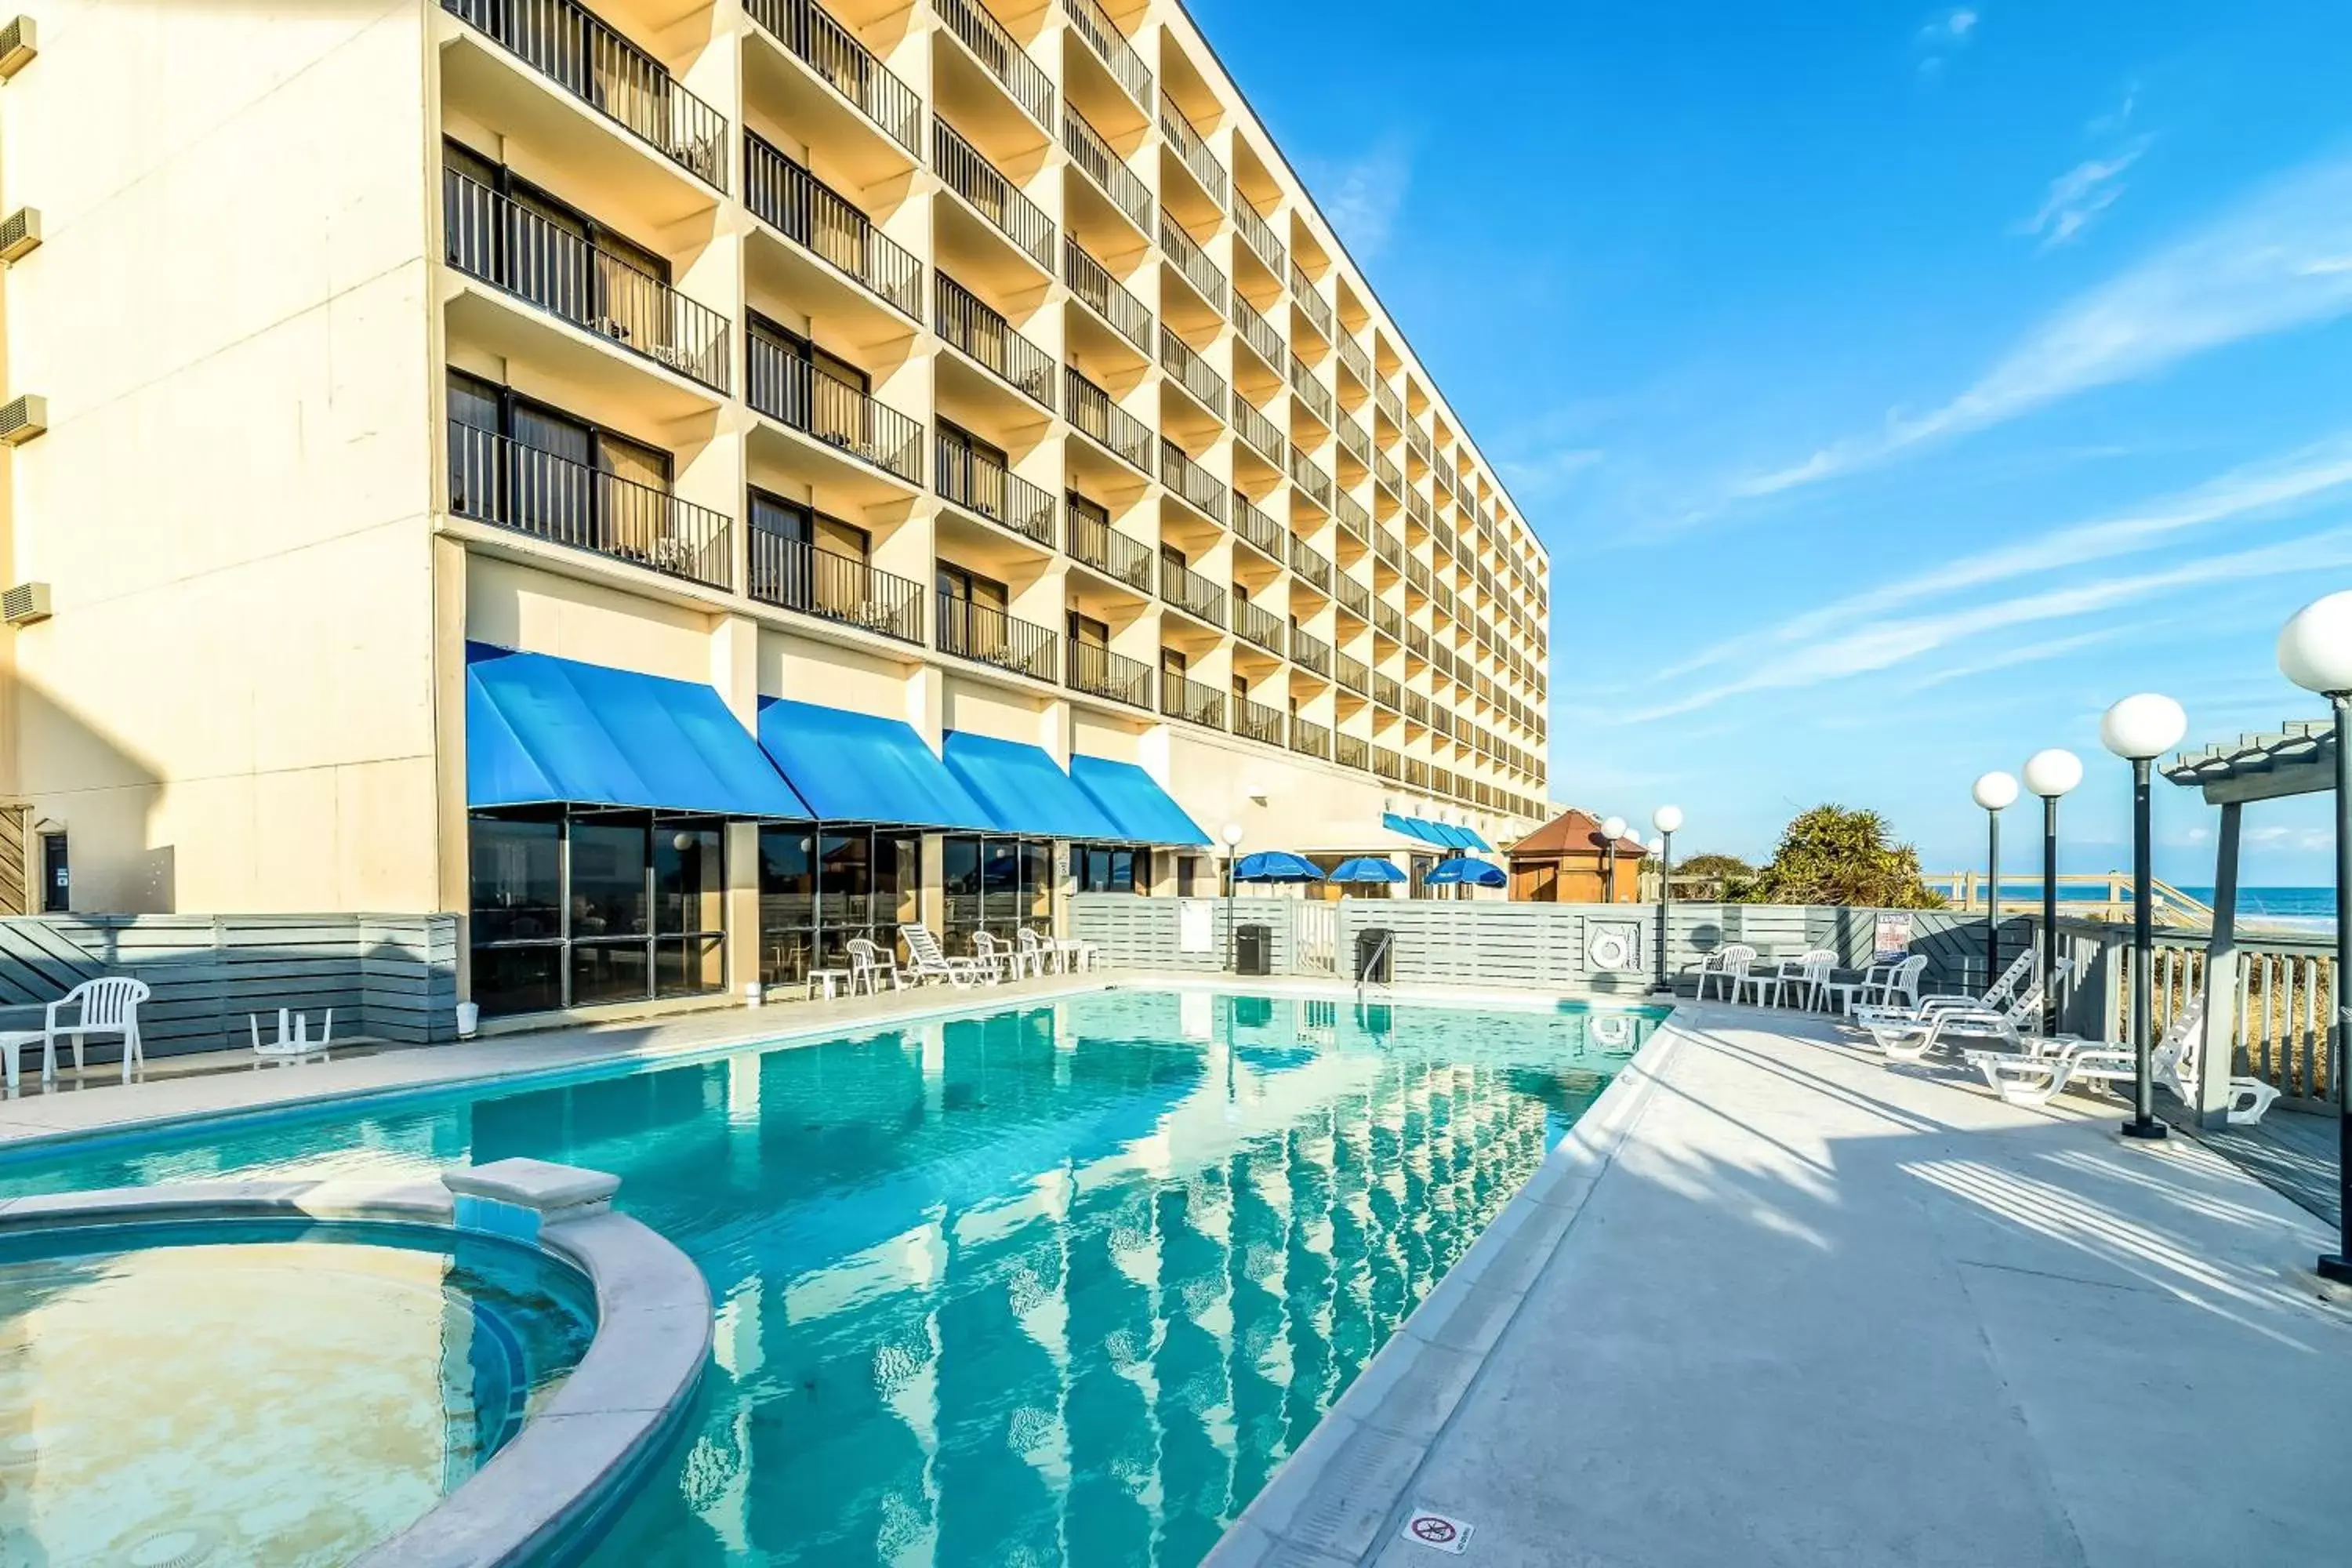 Property building, Swimming Pool in The Inn at Pine Knoll Shores Oceanfront